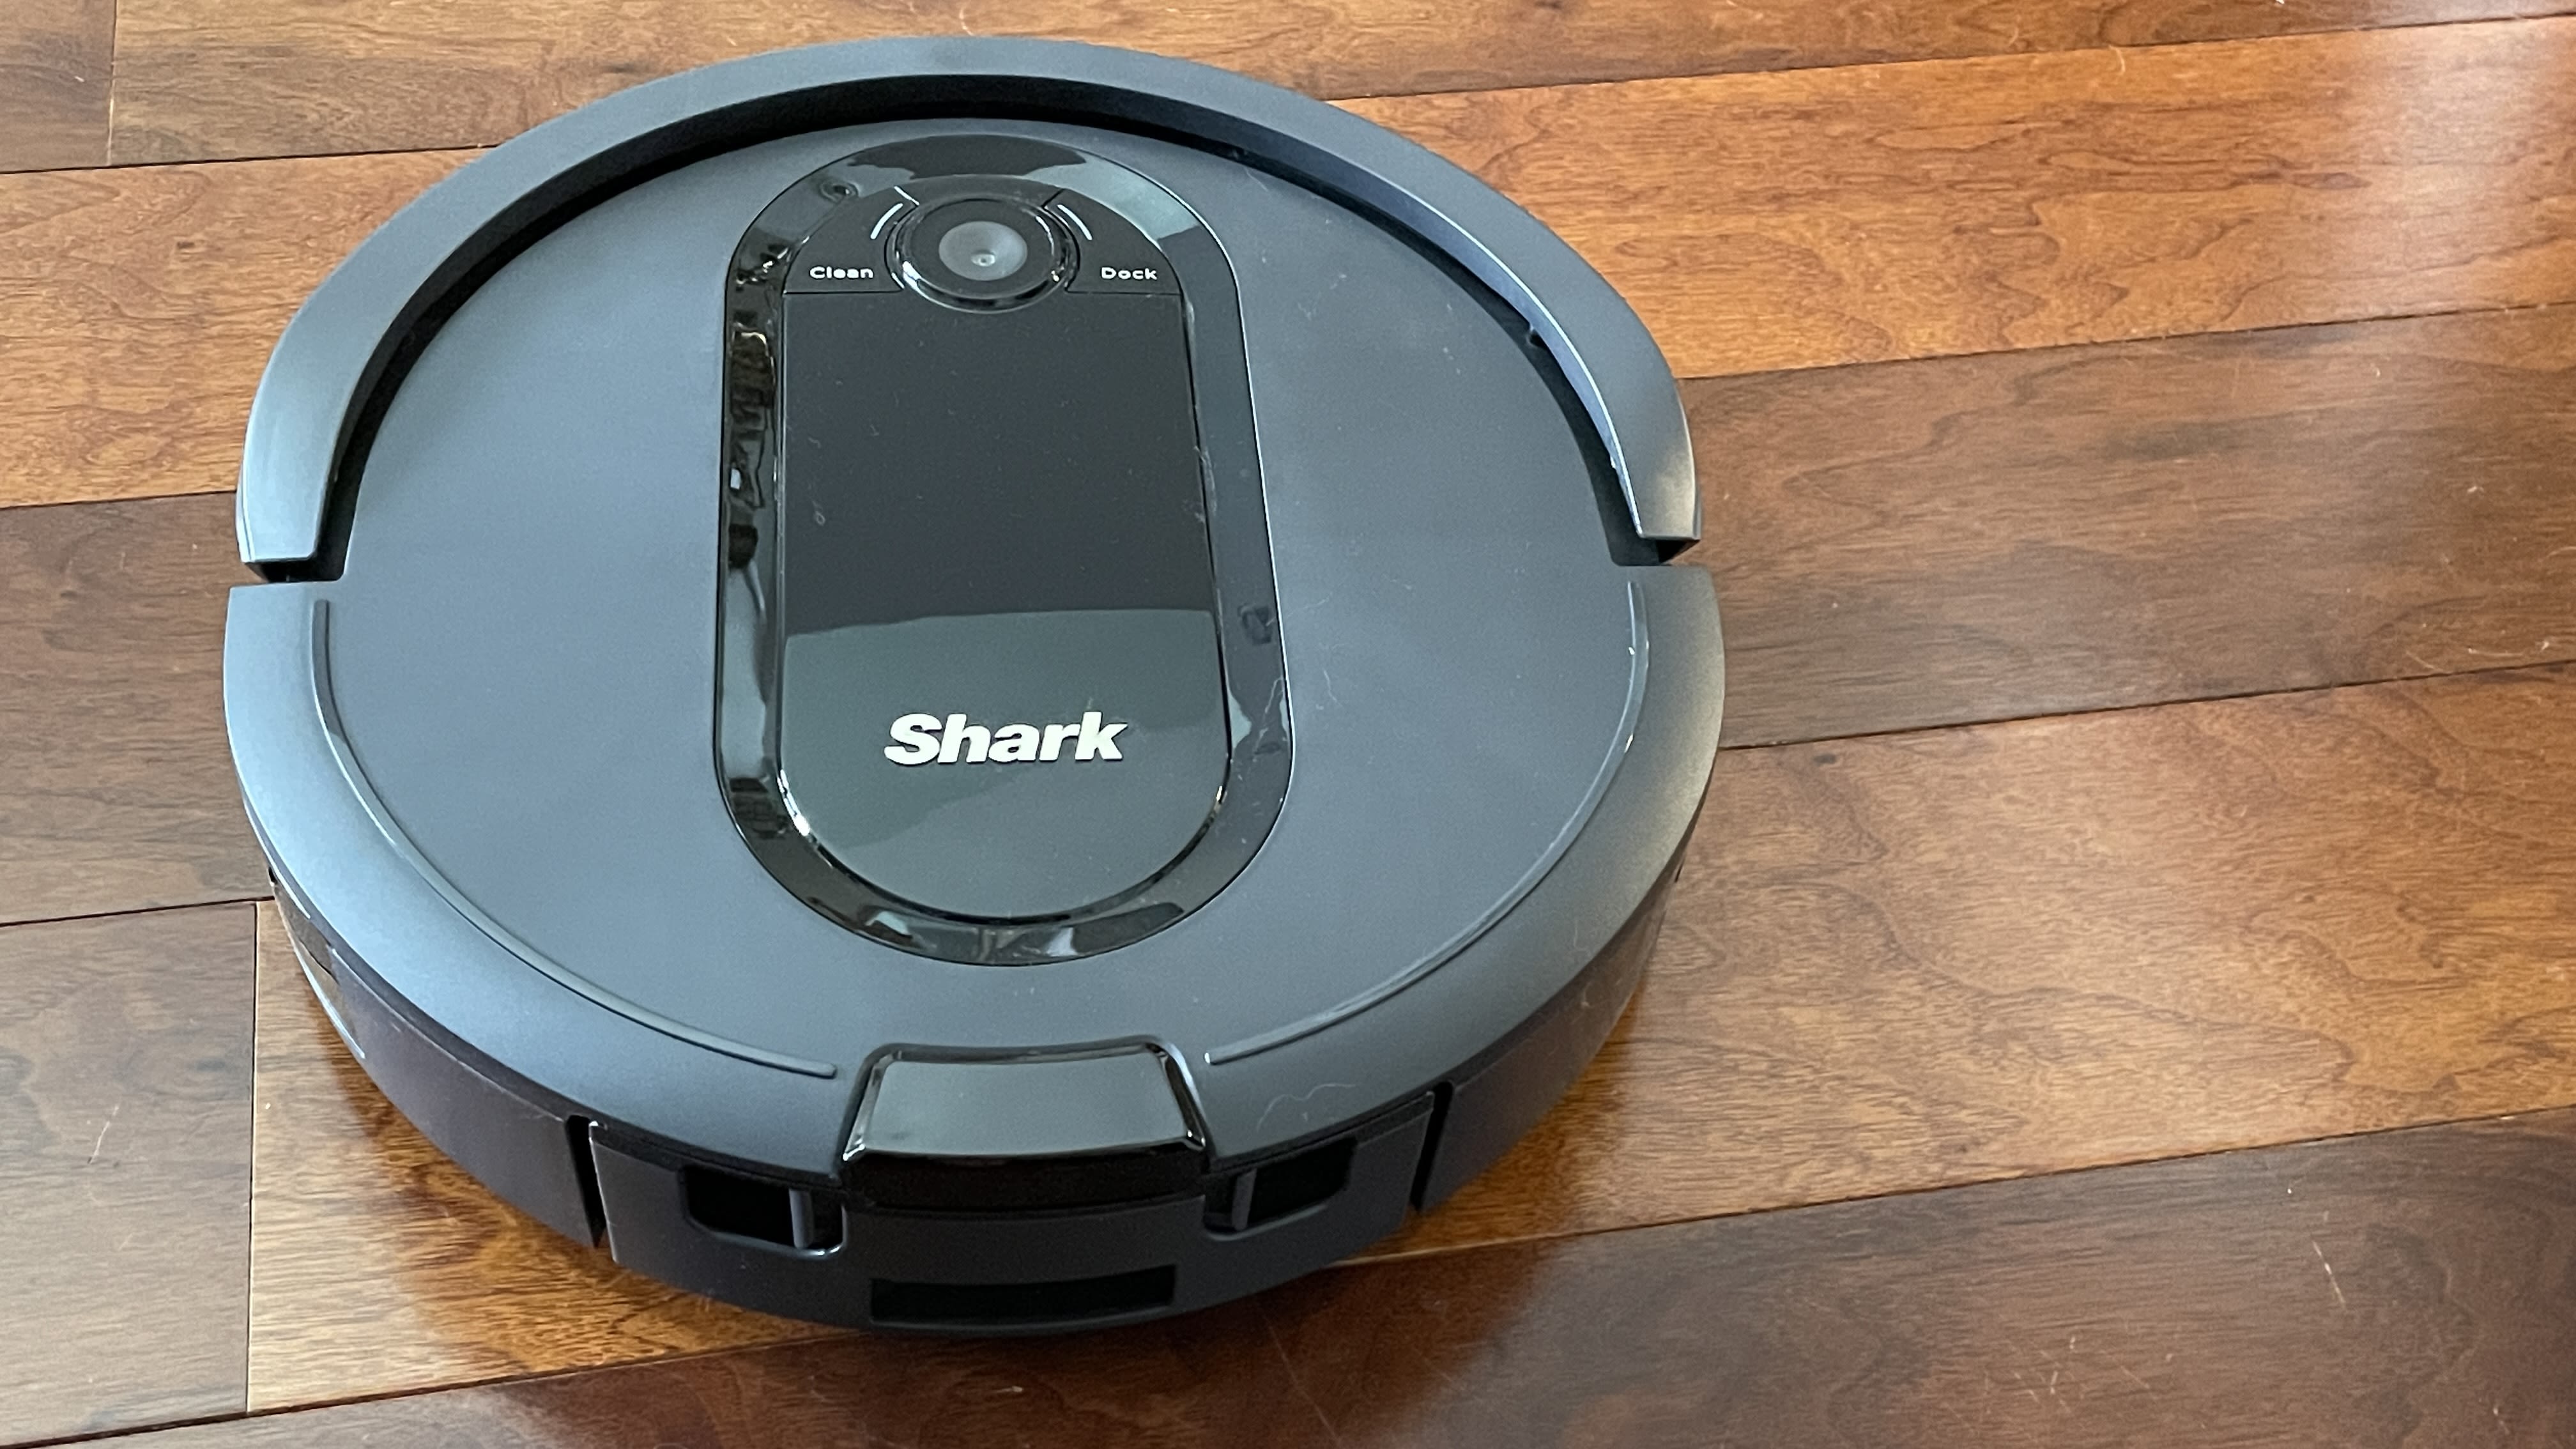 The best robot vacuums of 2024, tested by editors